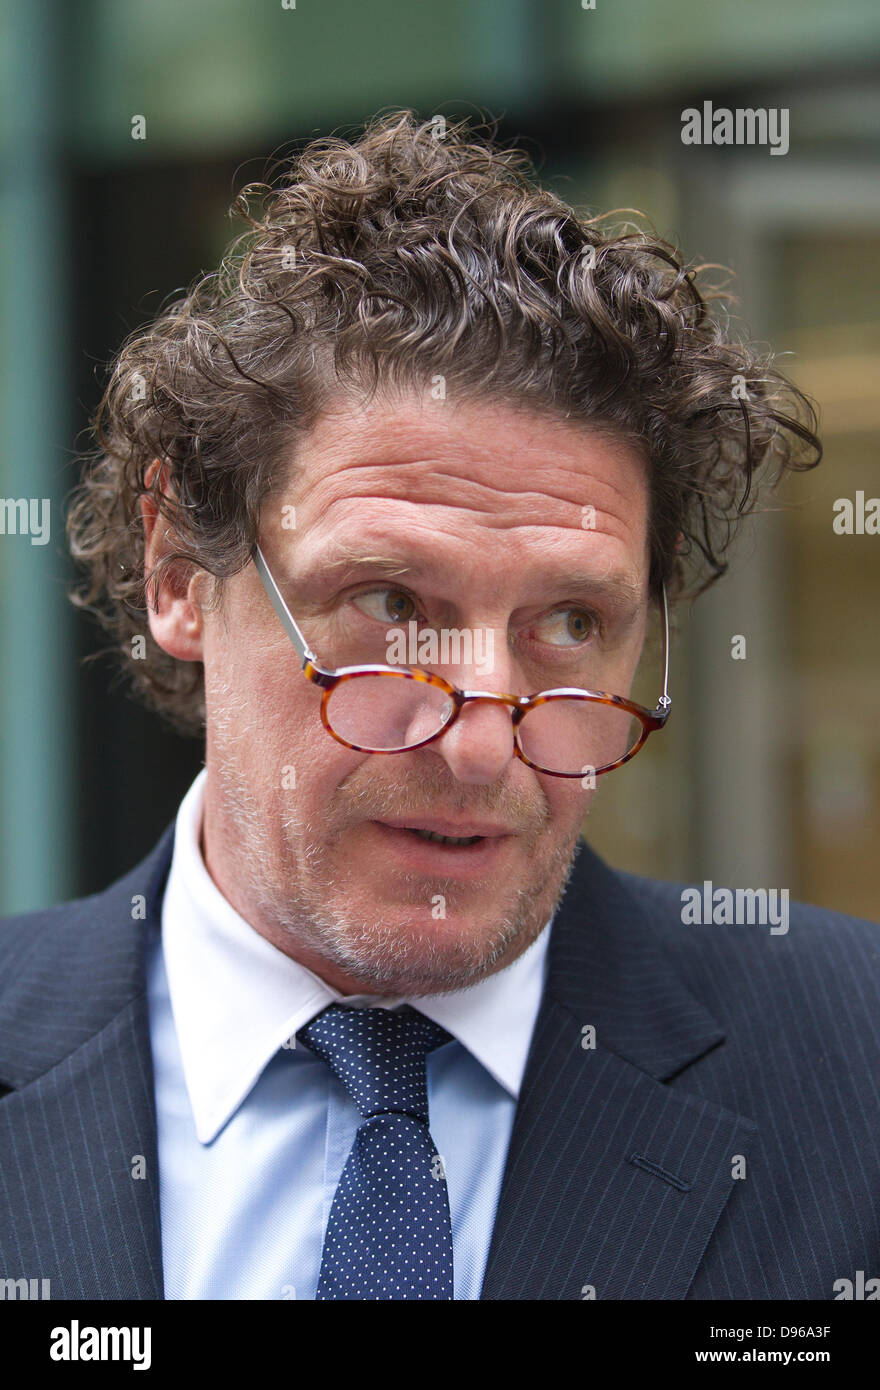 London, UK. 12th June 2013.  High profile chef Marco Pierre White today was at the Rolls Building suing former business partners over the ownership of 17th Century country pub 'the YewTree, located in Berkshire, England. Stock Photo